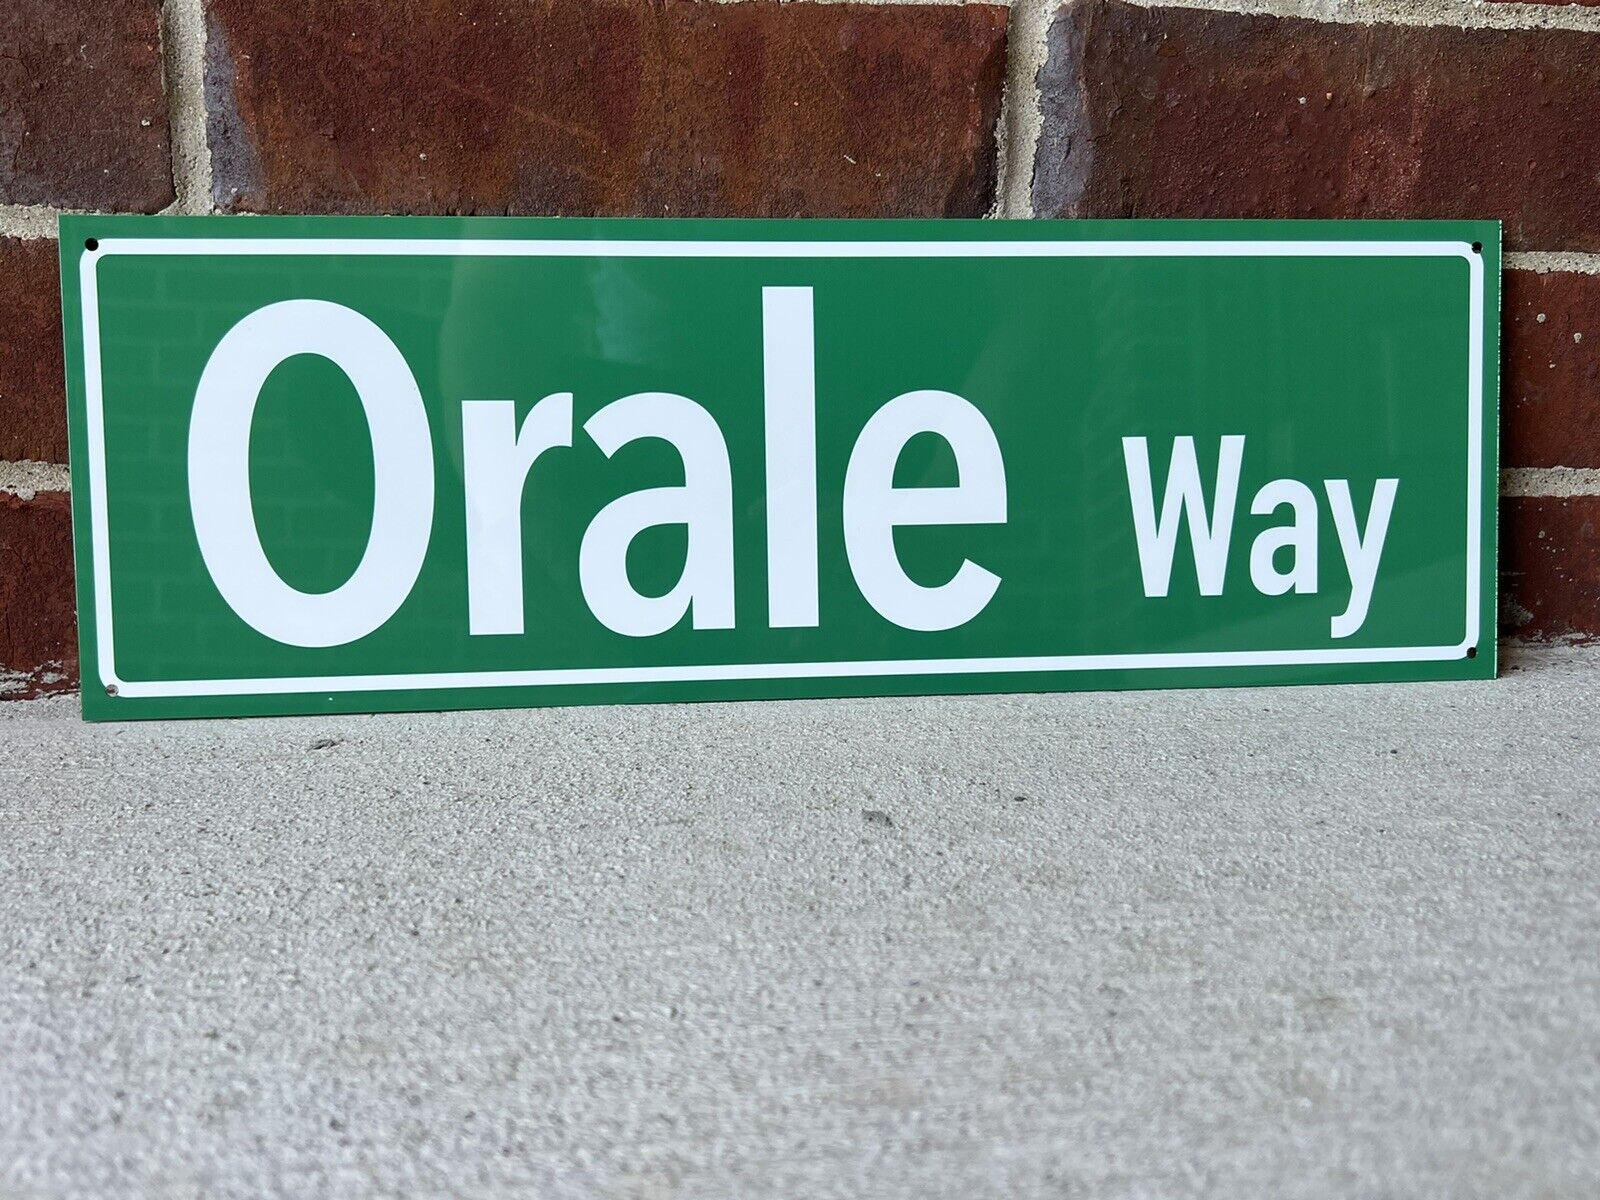 Mexico Orale Way Aluminum Road Street sign Mexican Rd Ave Funny